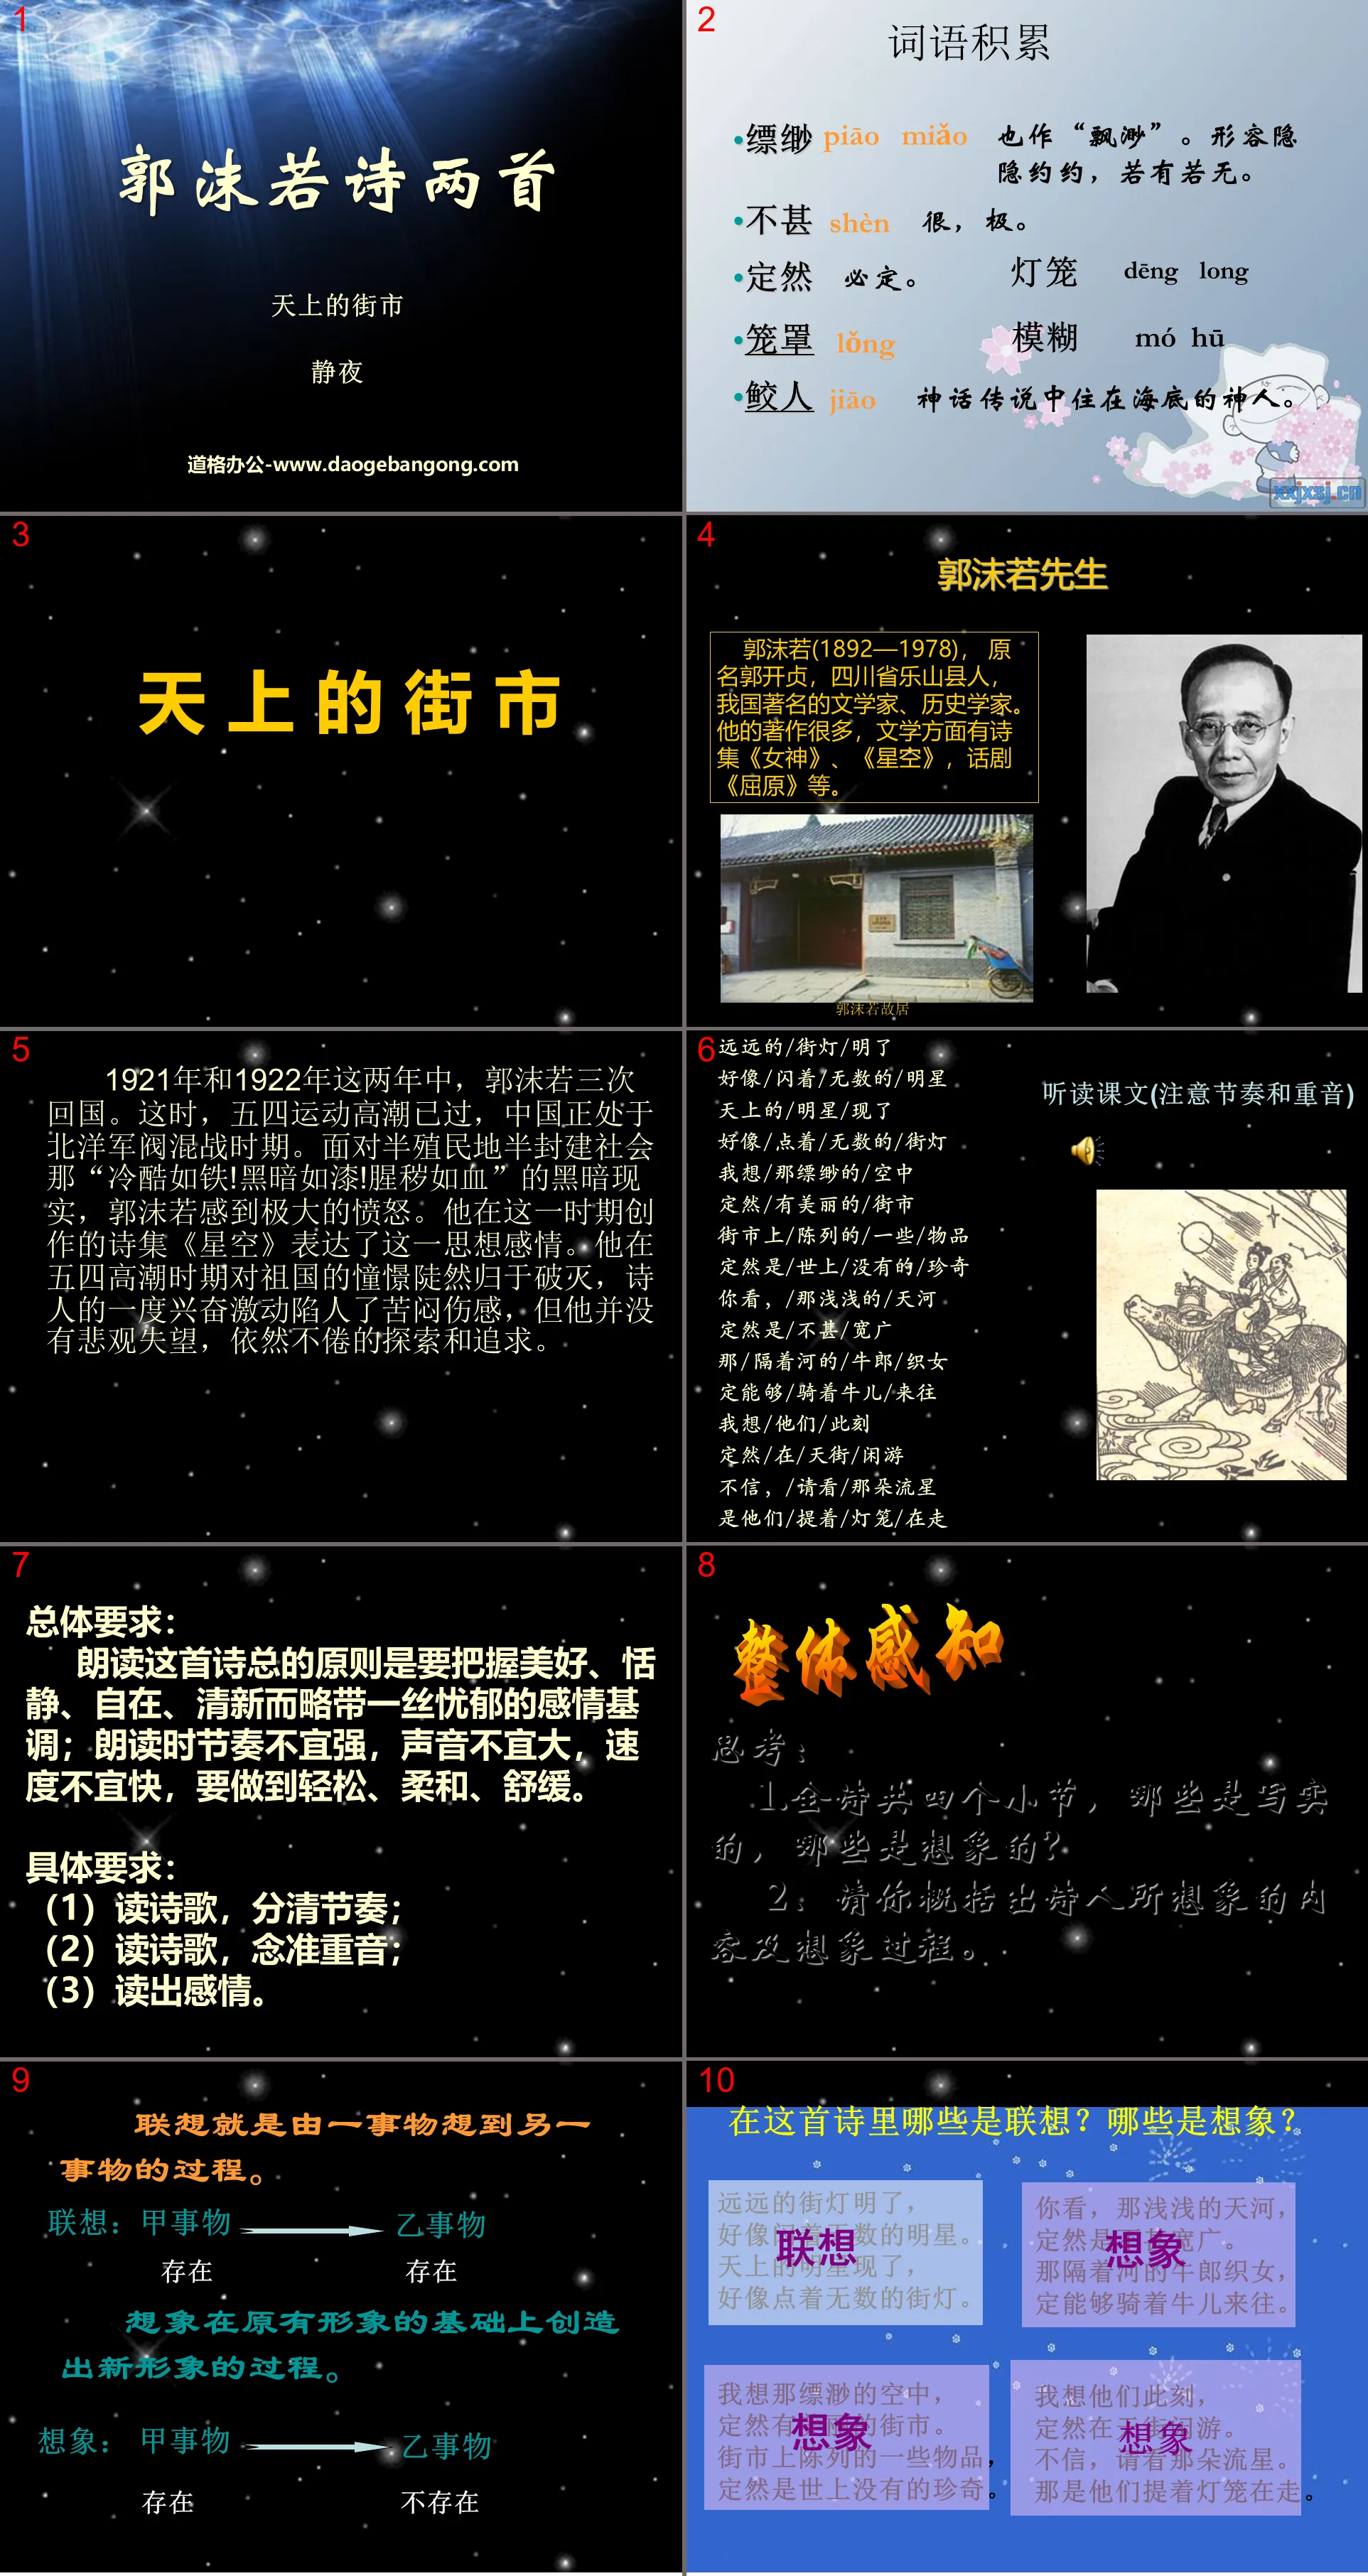 "Two Poems by Guo Moruo" PPT Courseware 4